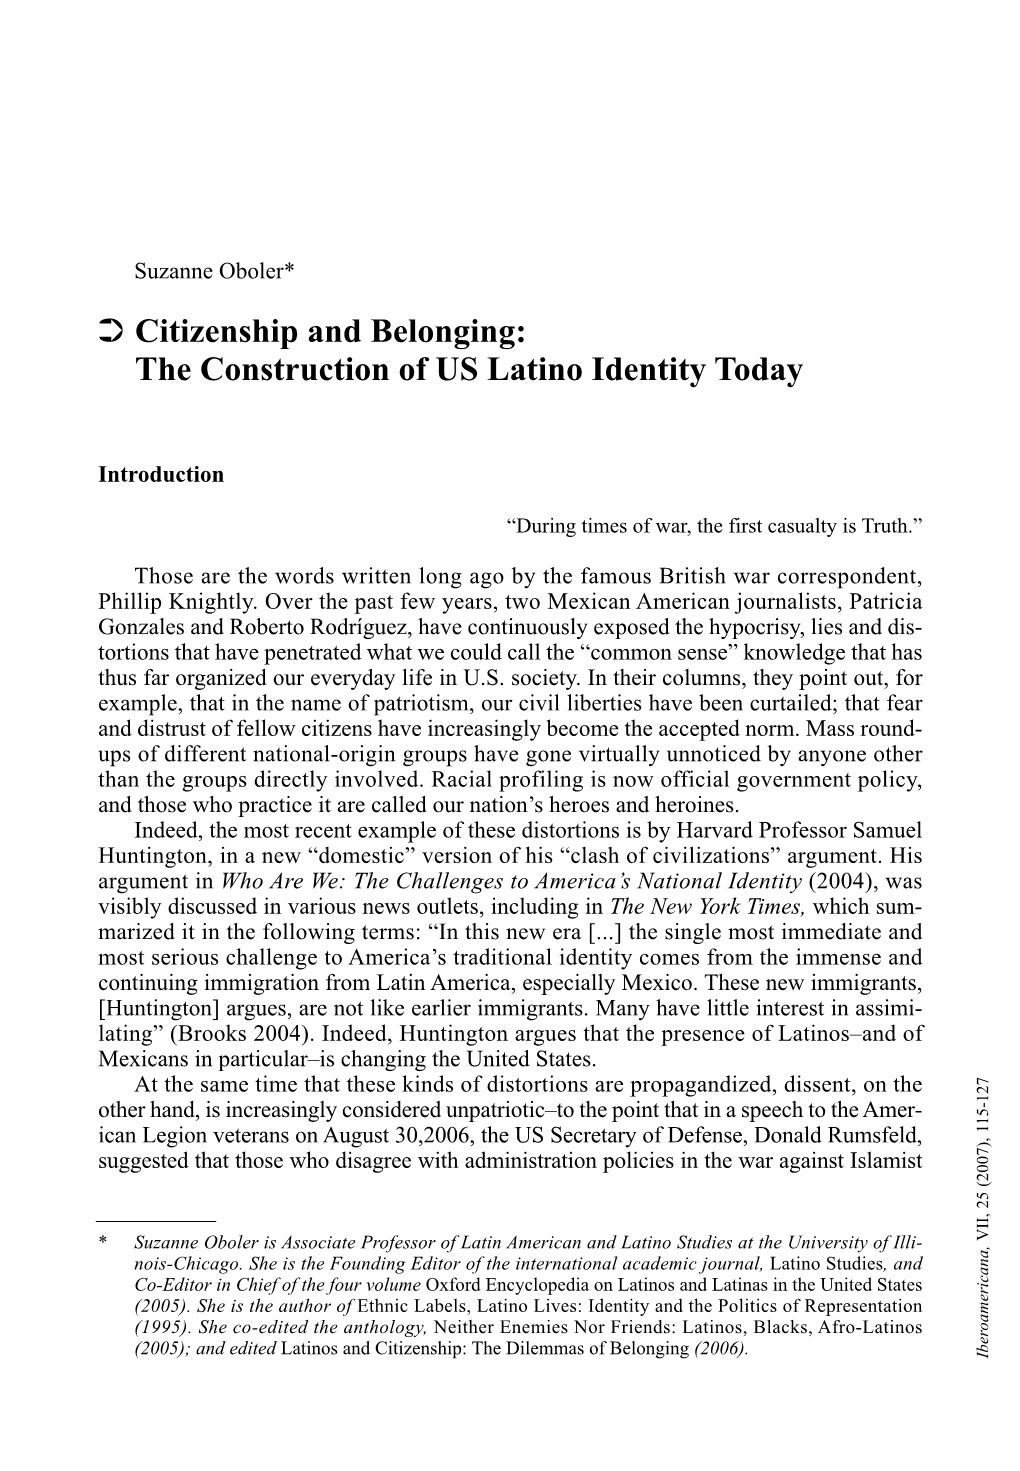 Citizenship and Belonging: the Construction of US Latino Identity Today